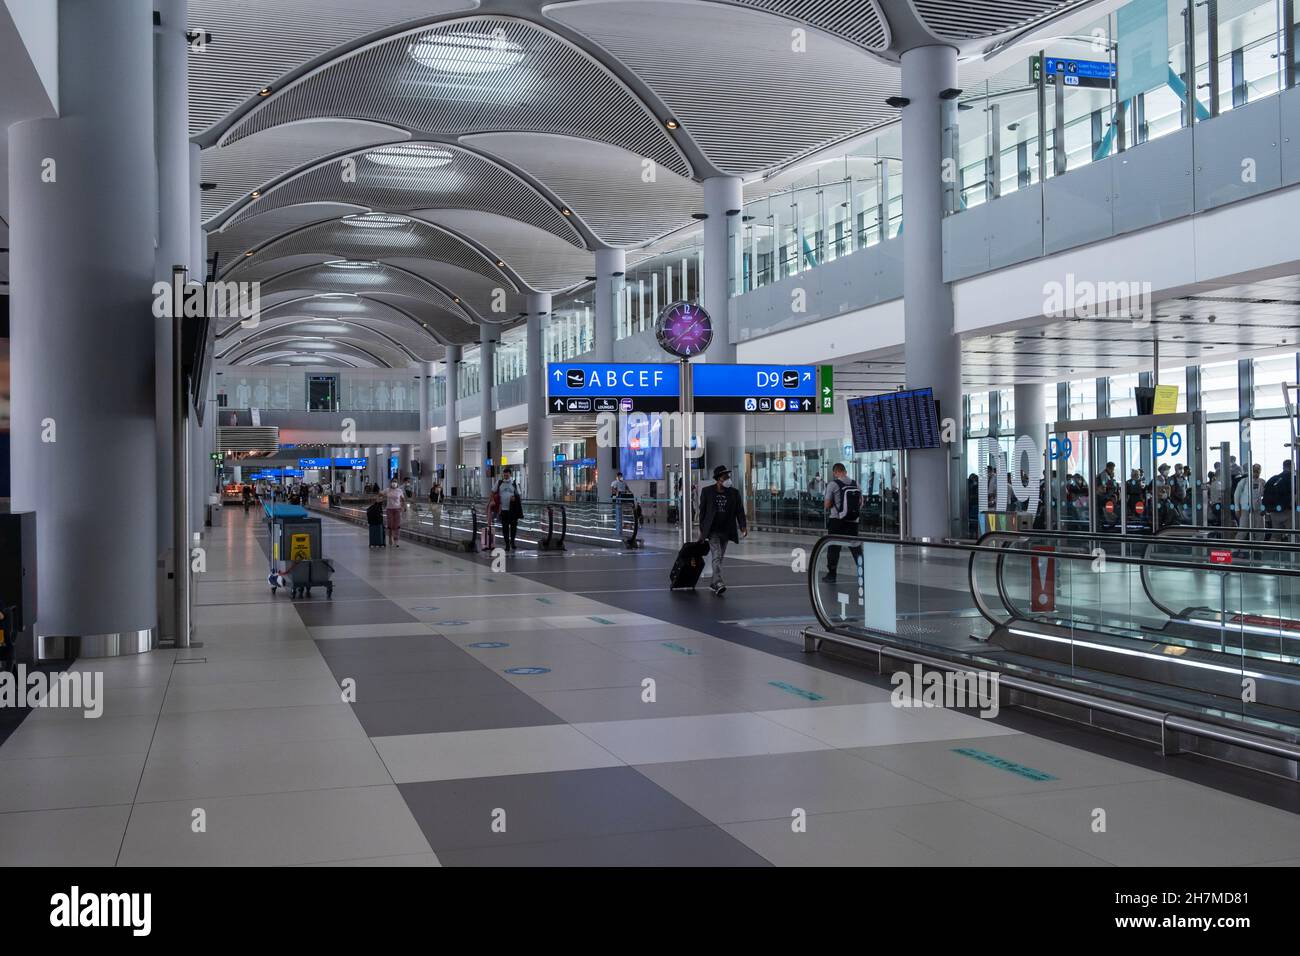 ISTANBUL, TURKEY - September 7, 2021: New Istanbul Airport. The interior of New Airport Terminal in Istanbul. Stock Photo